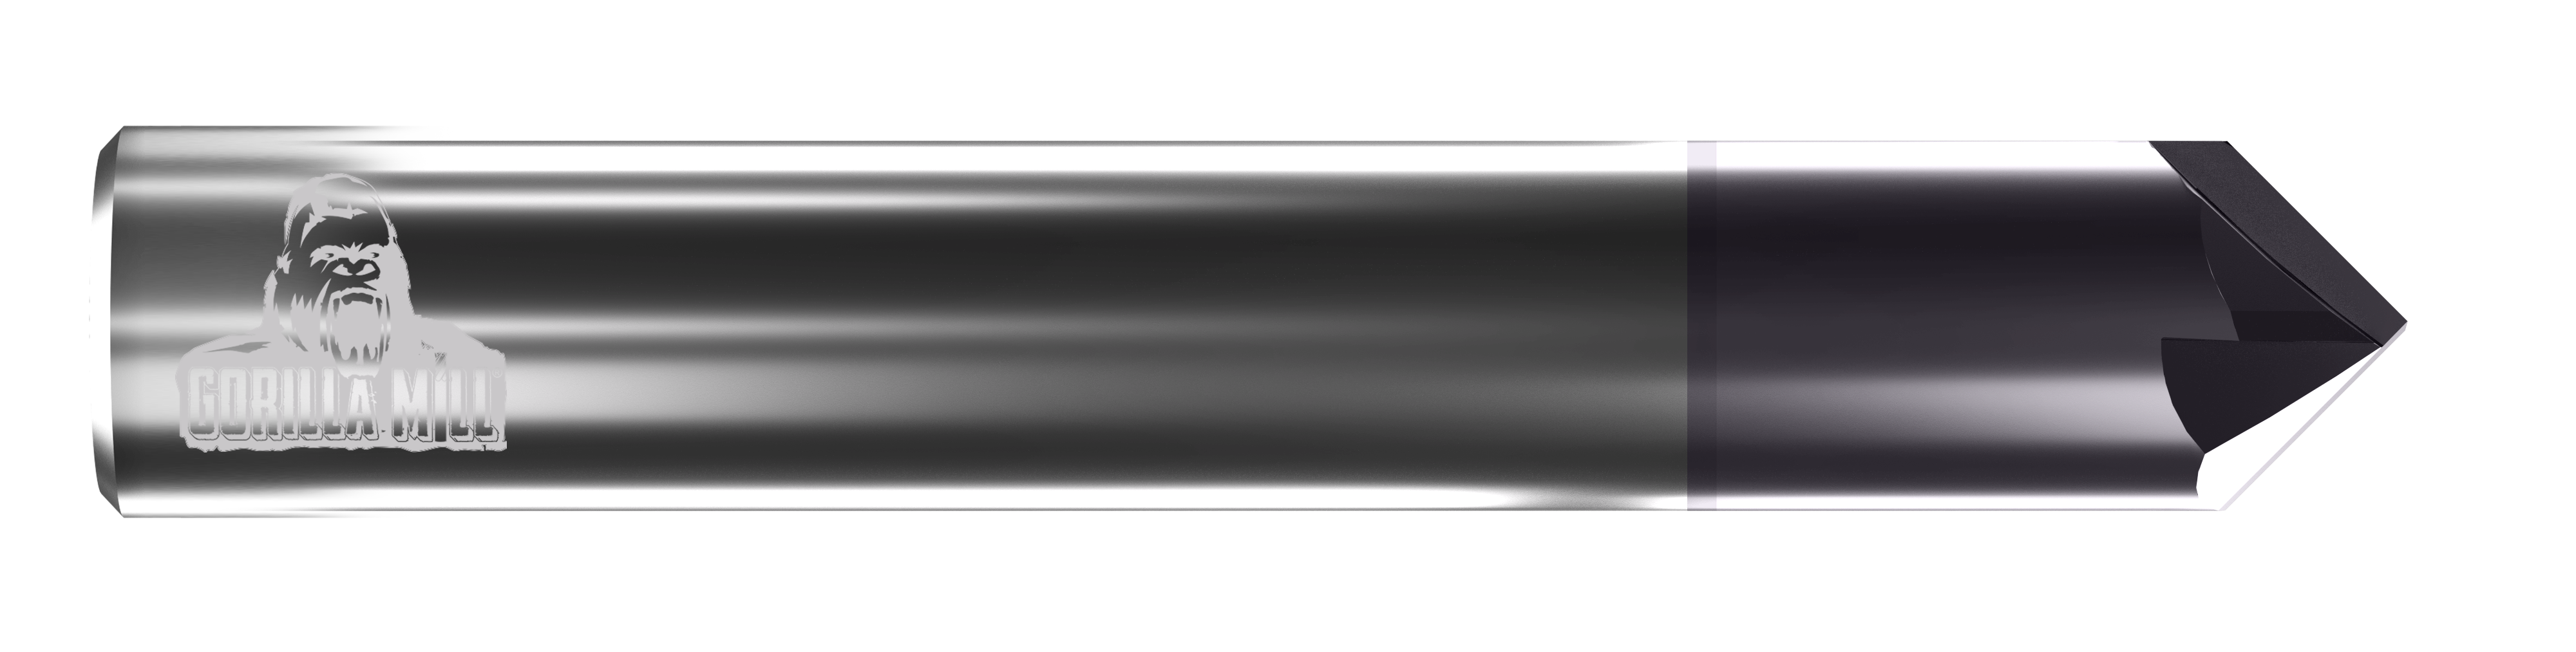 CMHPXXC4-V2-profile-view.png